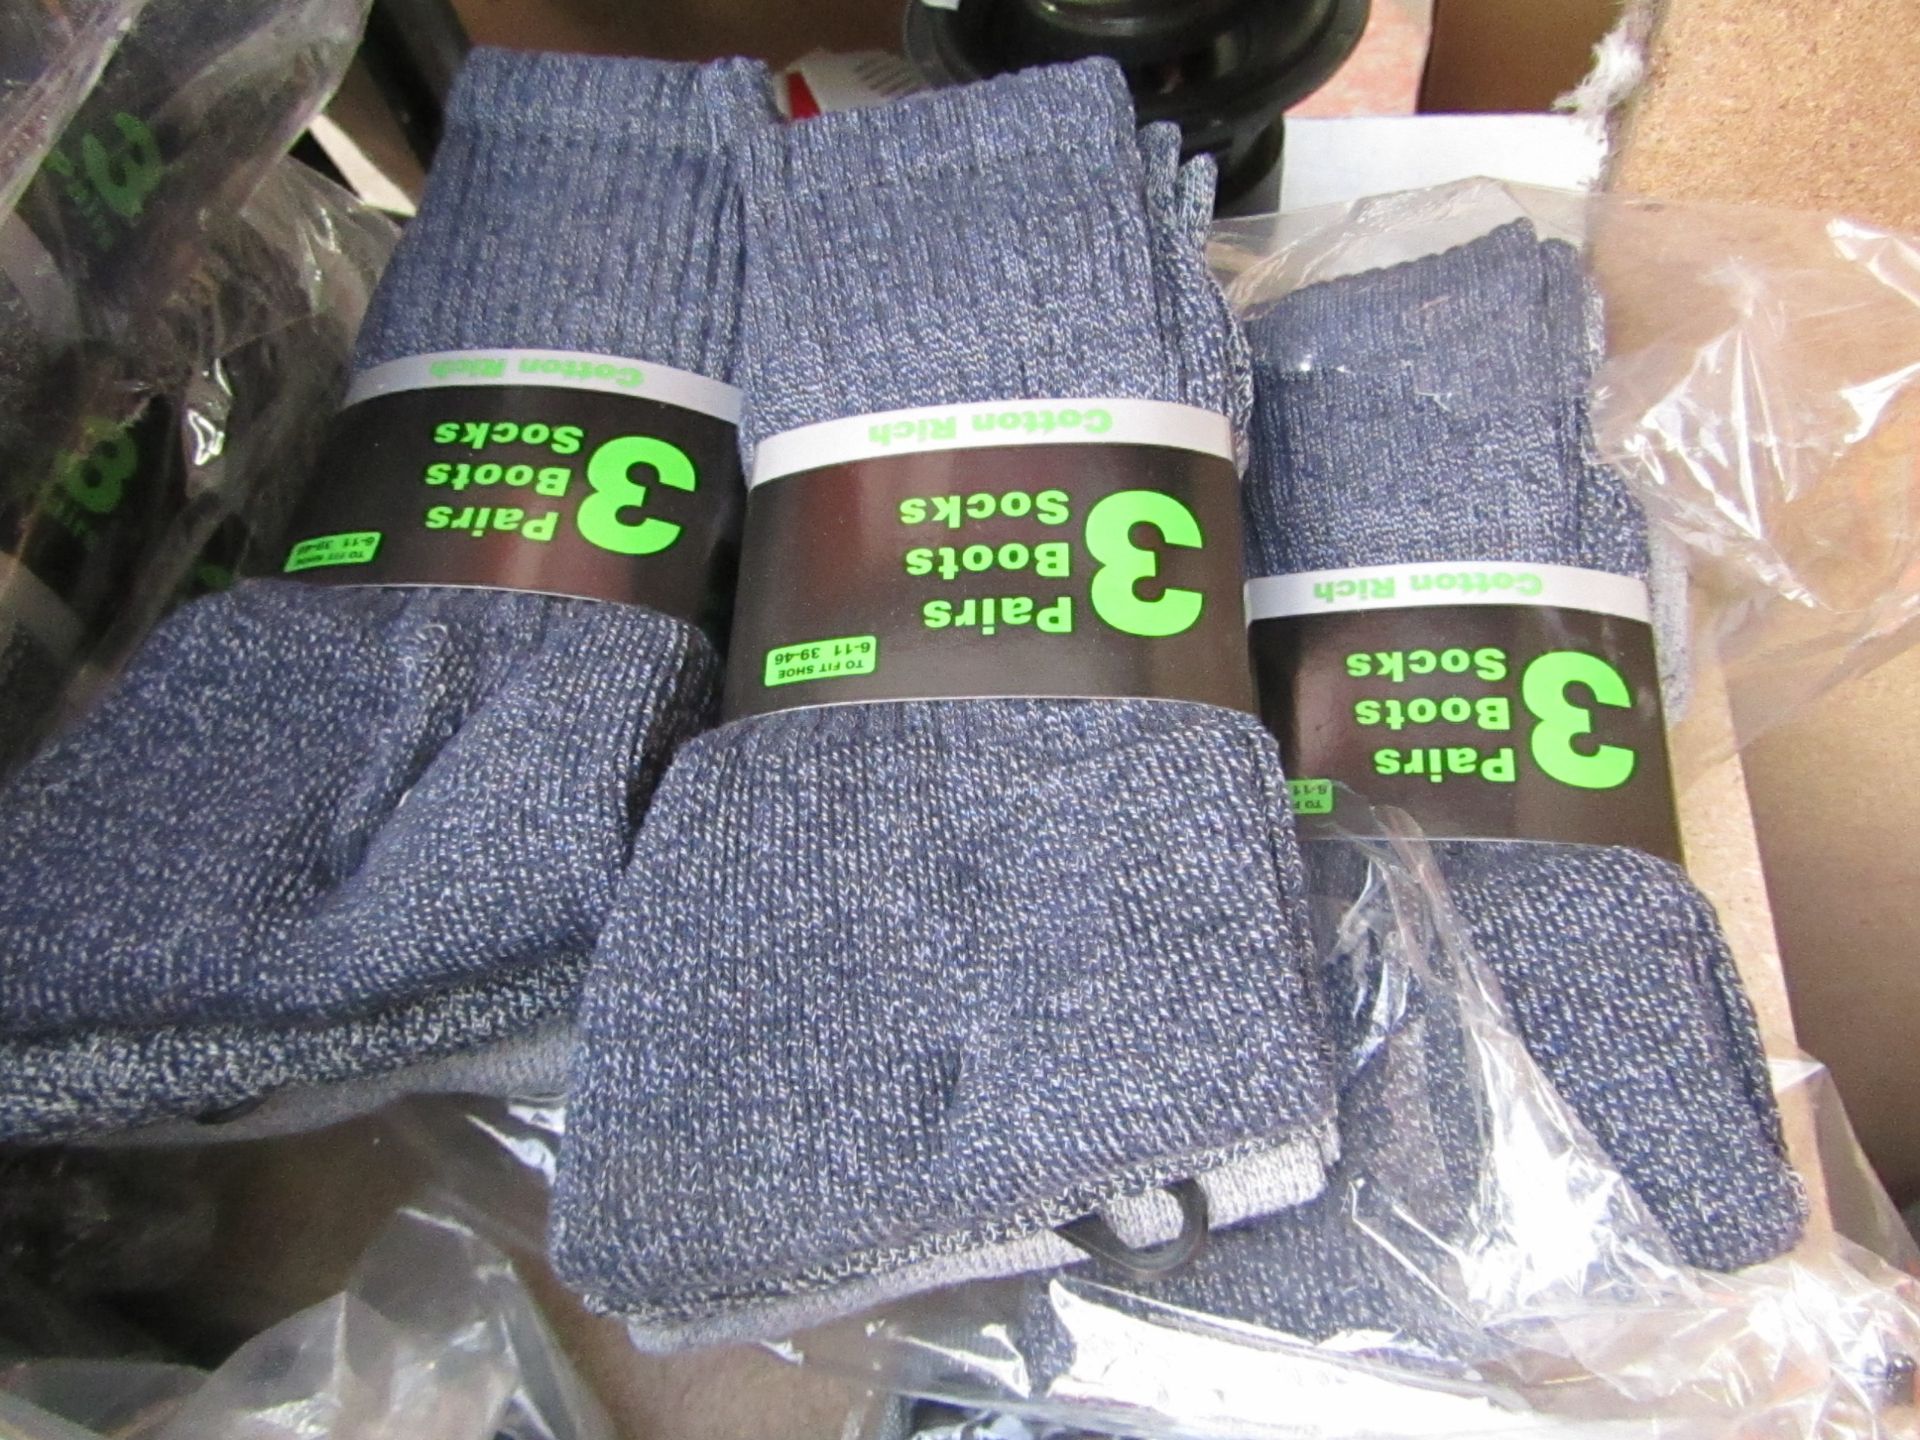 12x Pairs of cotton rich workmen boot socks, new Size 6-11.